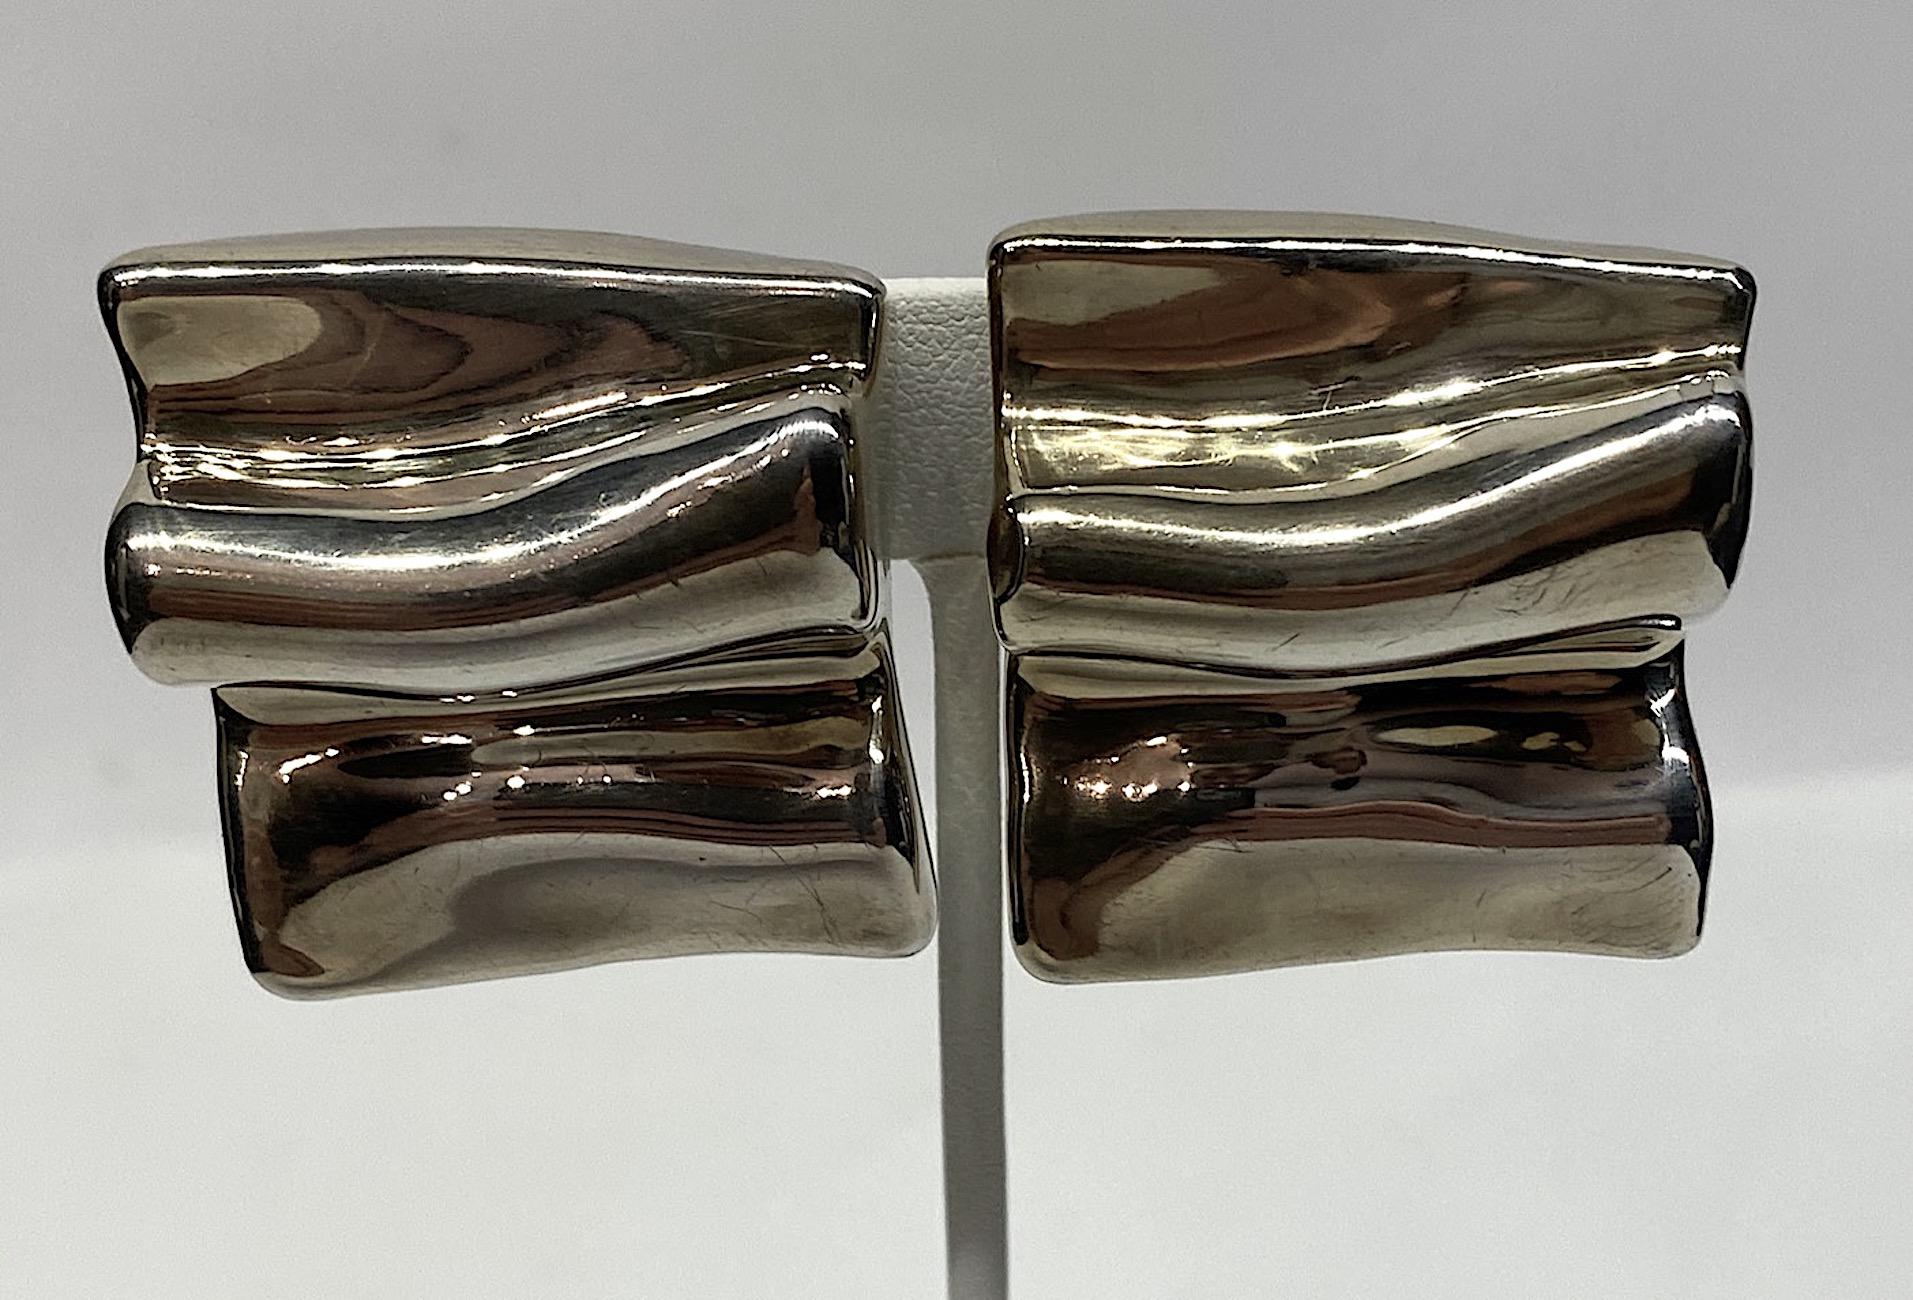 Women's 1980s Abstract Sculptural Sterling Silver Modernist Earrings